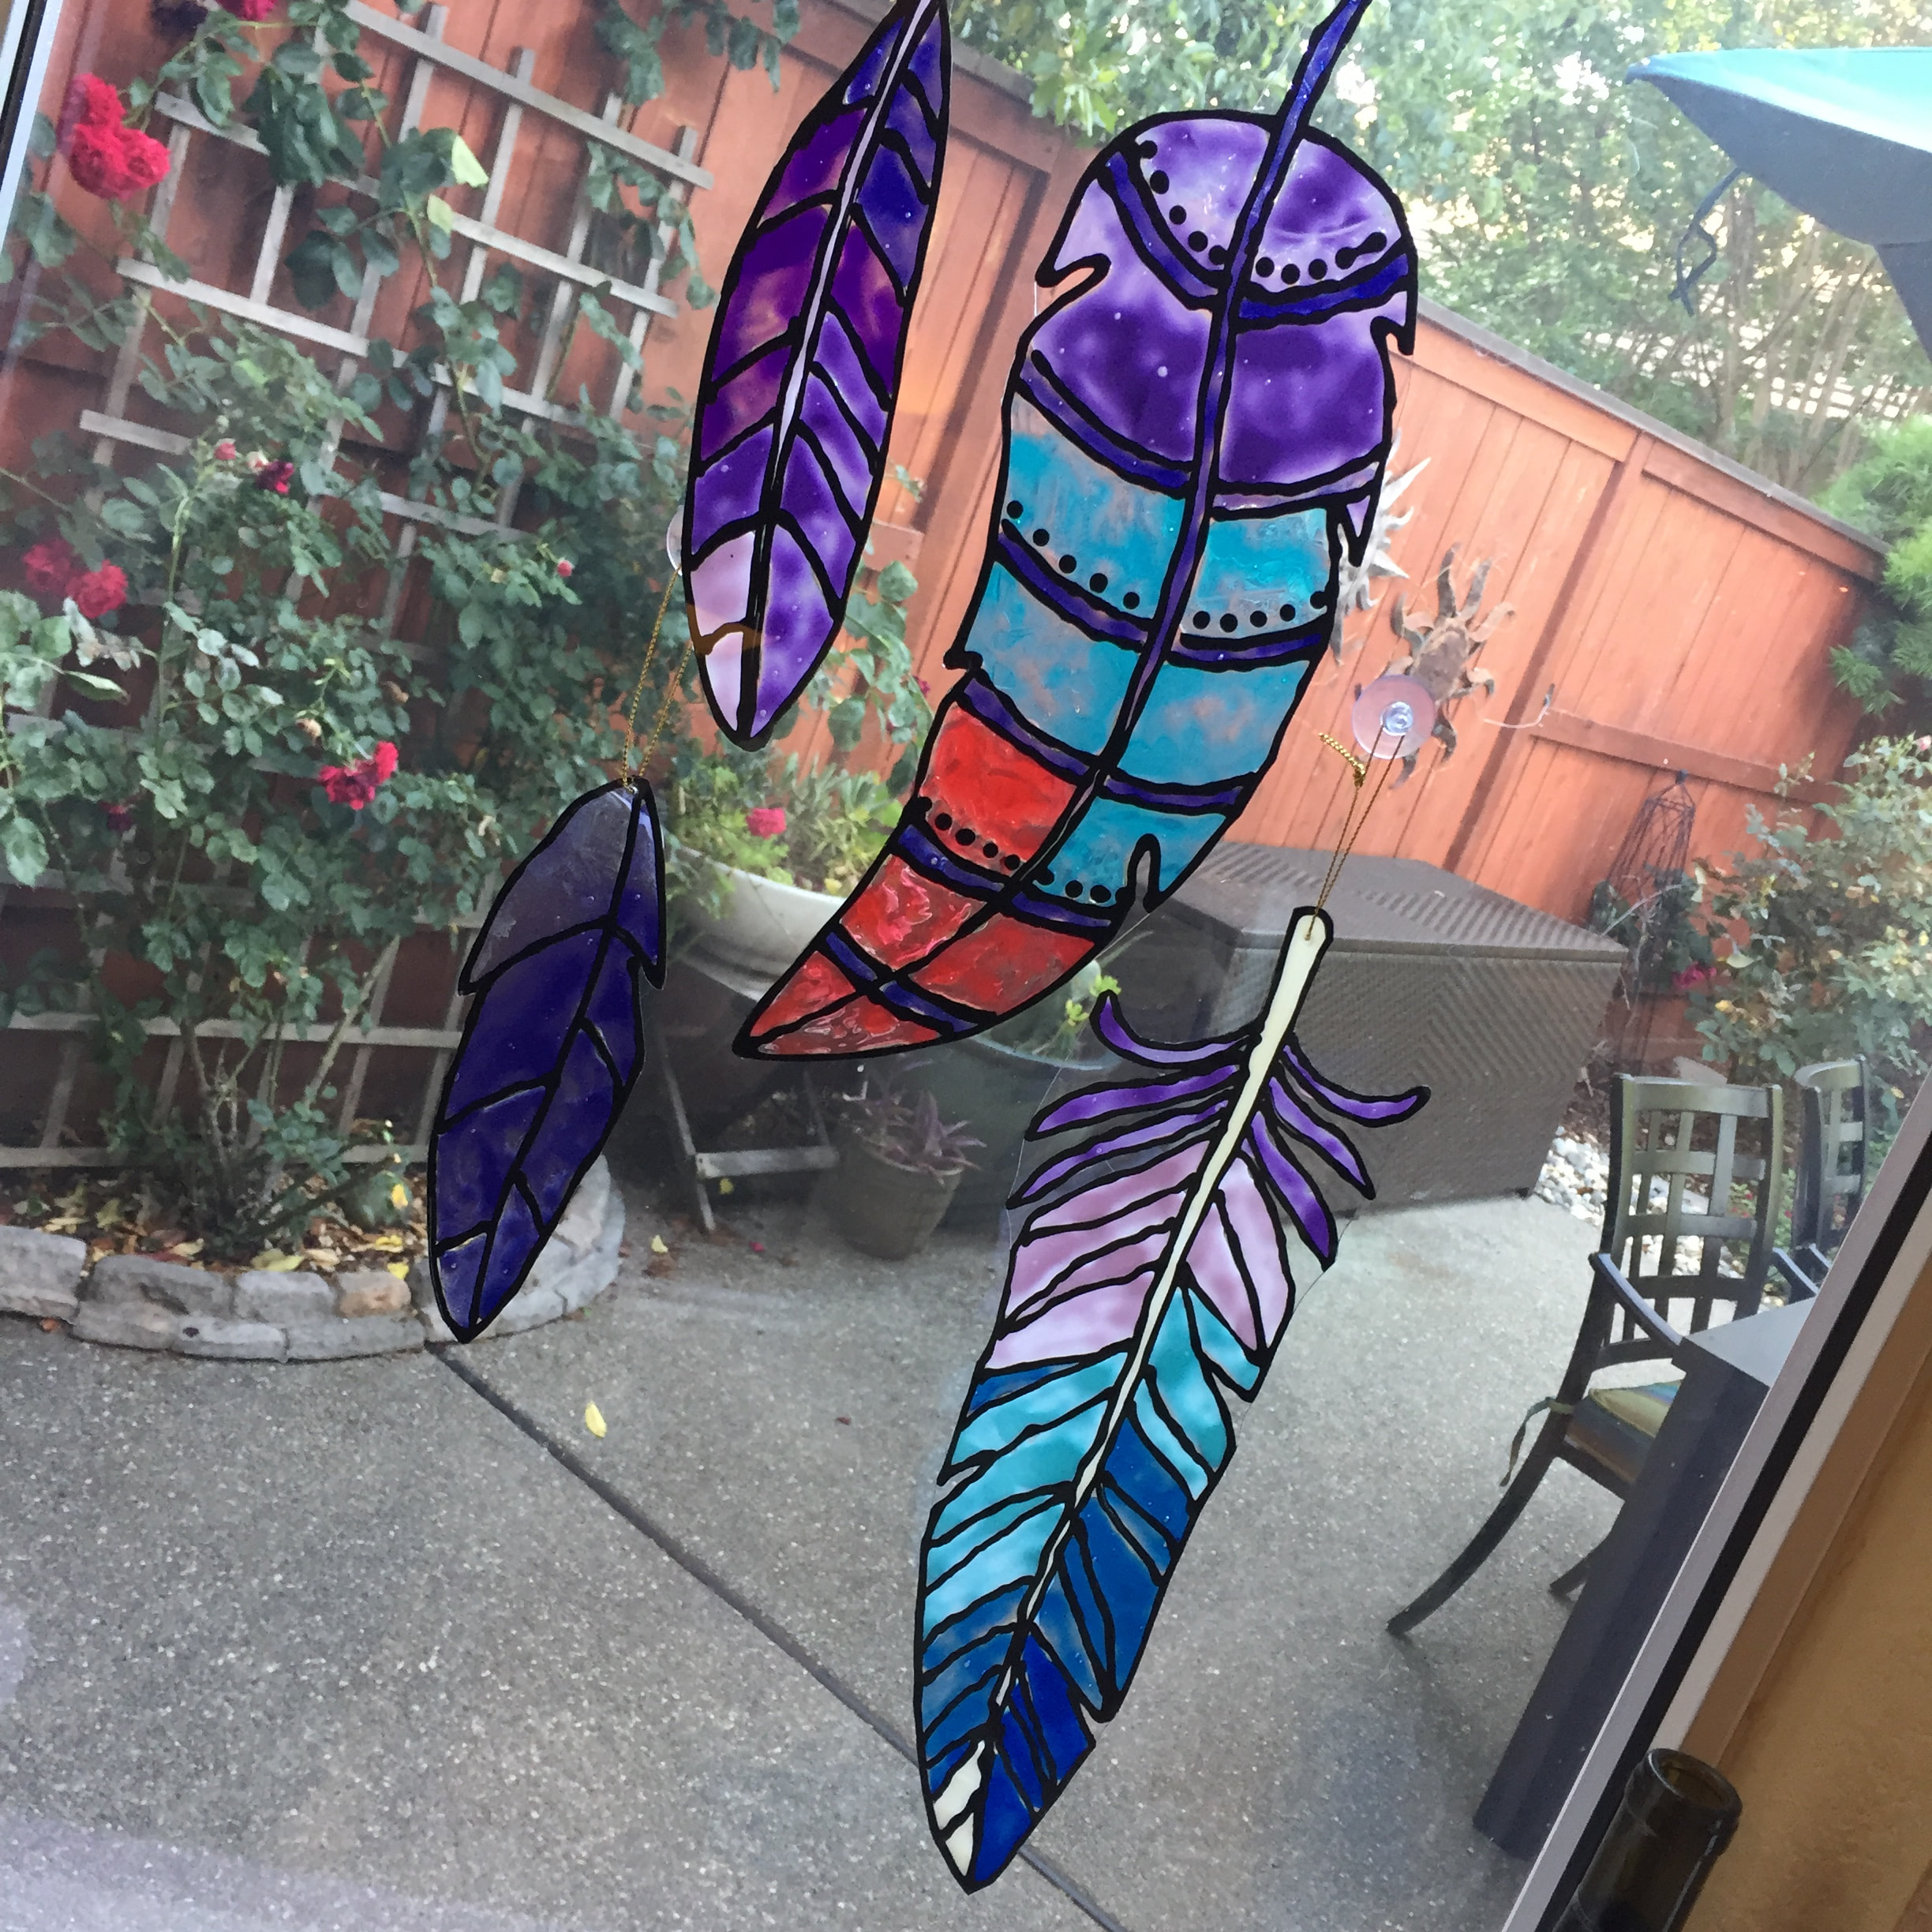 Faux Stained Glass Feather -Blues